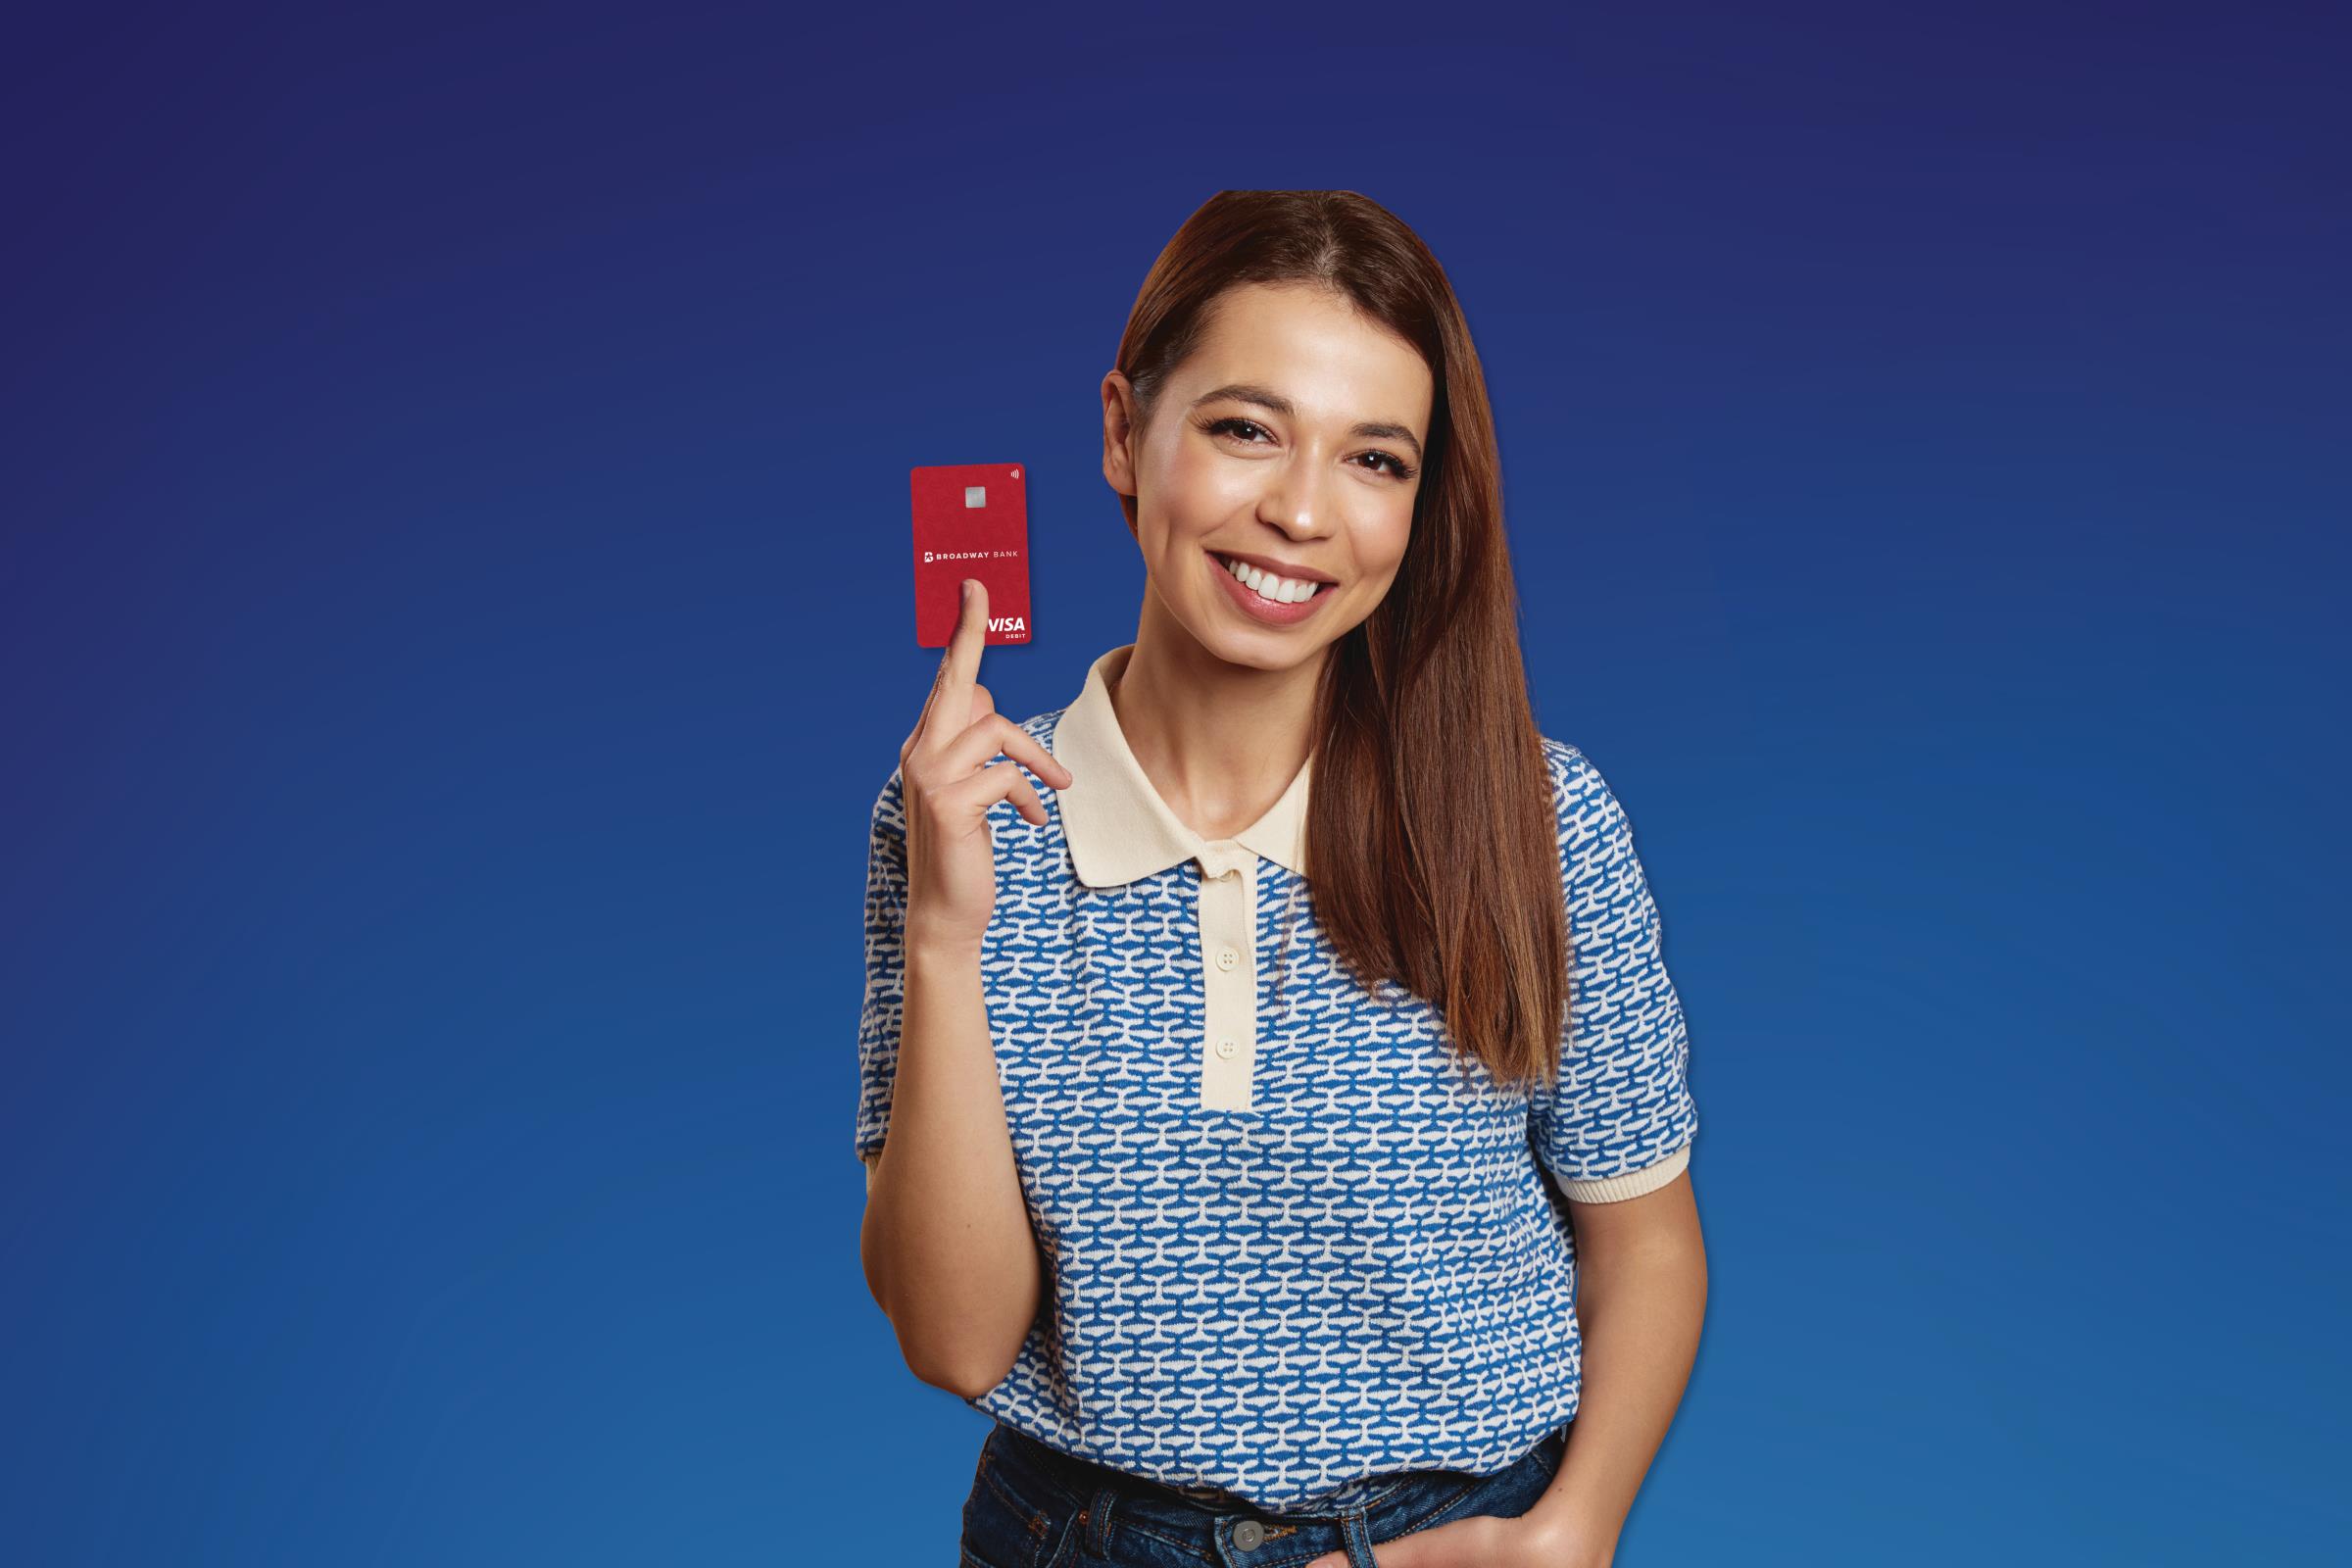 A young lady excited on a blue background - earn $300 when you open free checking